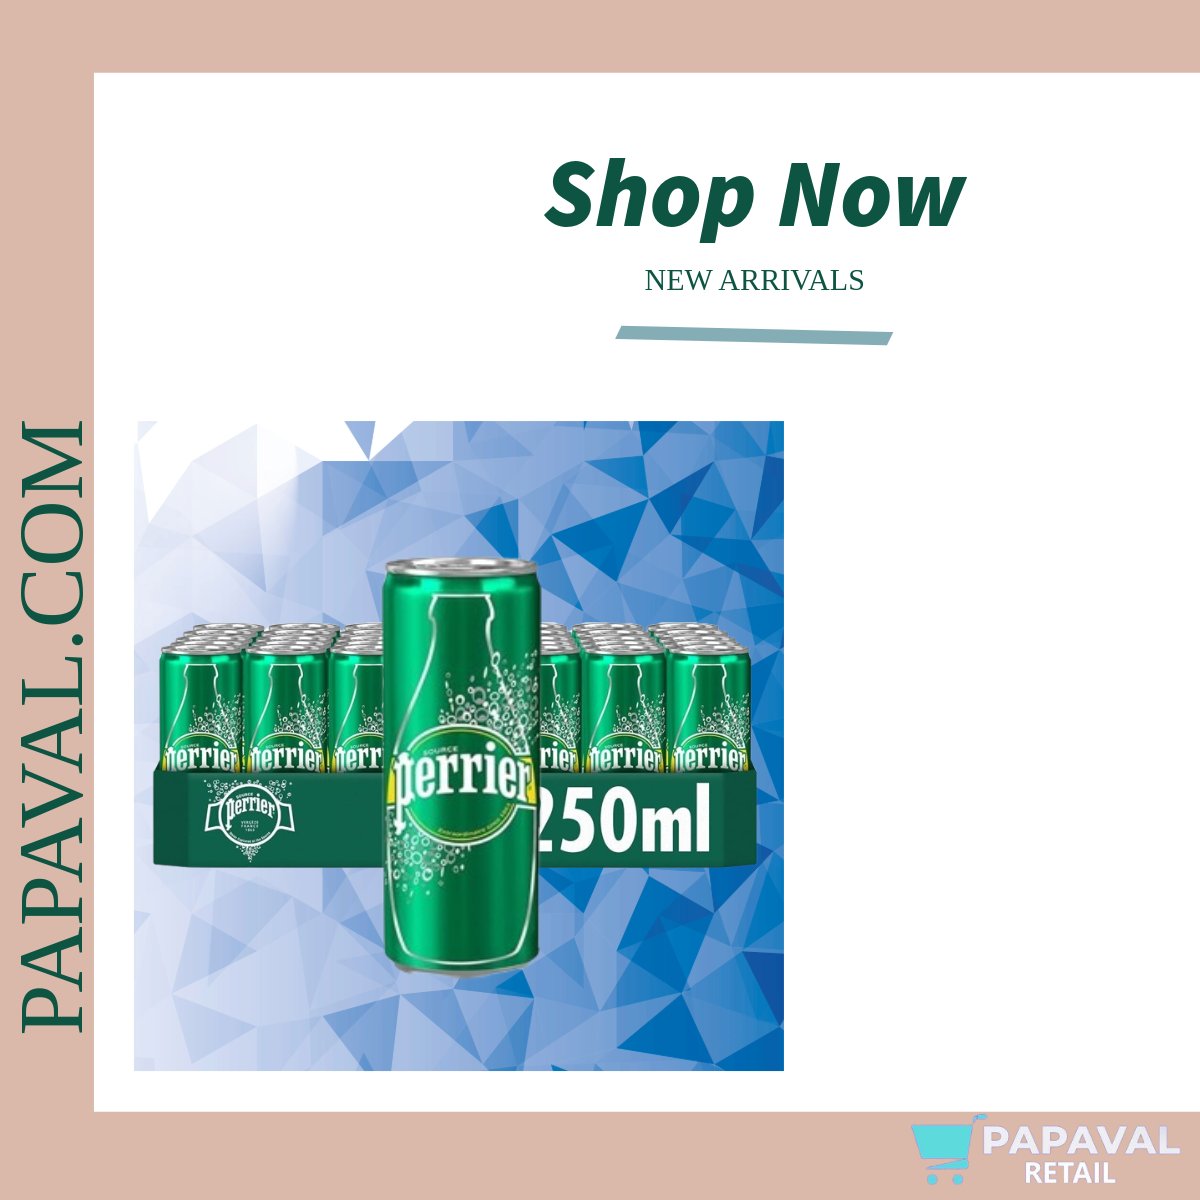 🎉 Bubbly with excitement to start the week off right! 😊 Nothing beats the refreshing taste of Perrier Sparkling Natural Mineral Water💧. And now, you can get your hands on it at Papaval!🏃‍♀️ #Perrier #sparklingmineralwater #SparklingWater #MineralWater #RefreshYourDay #Papaval